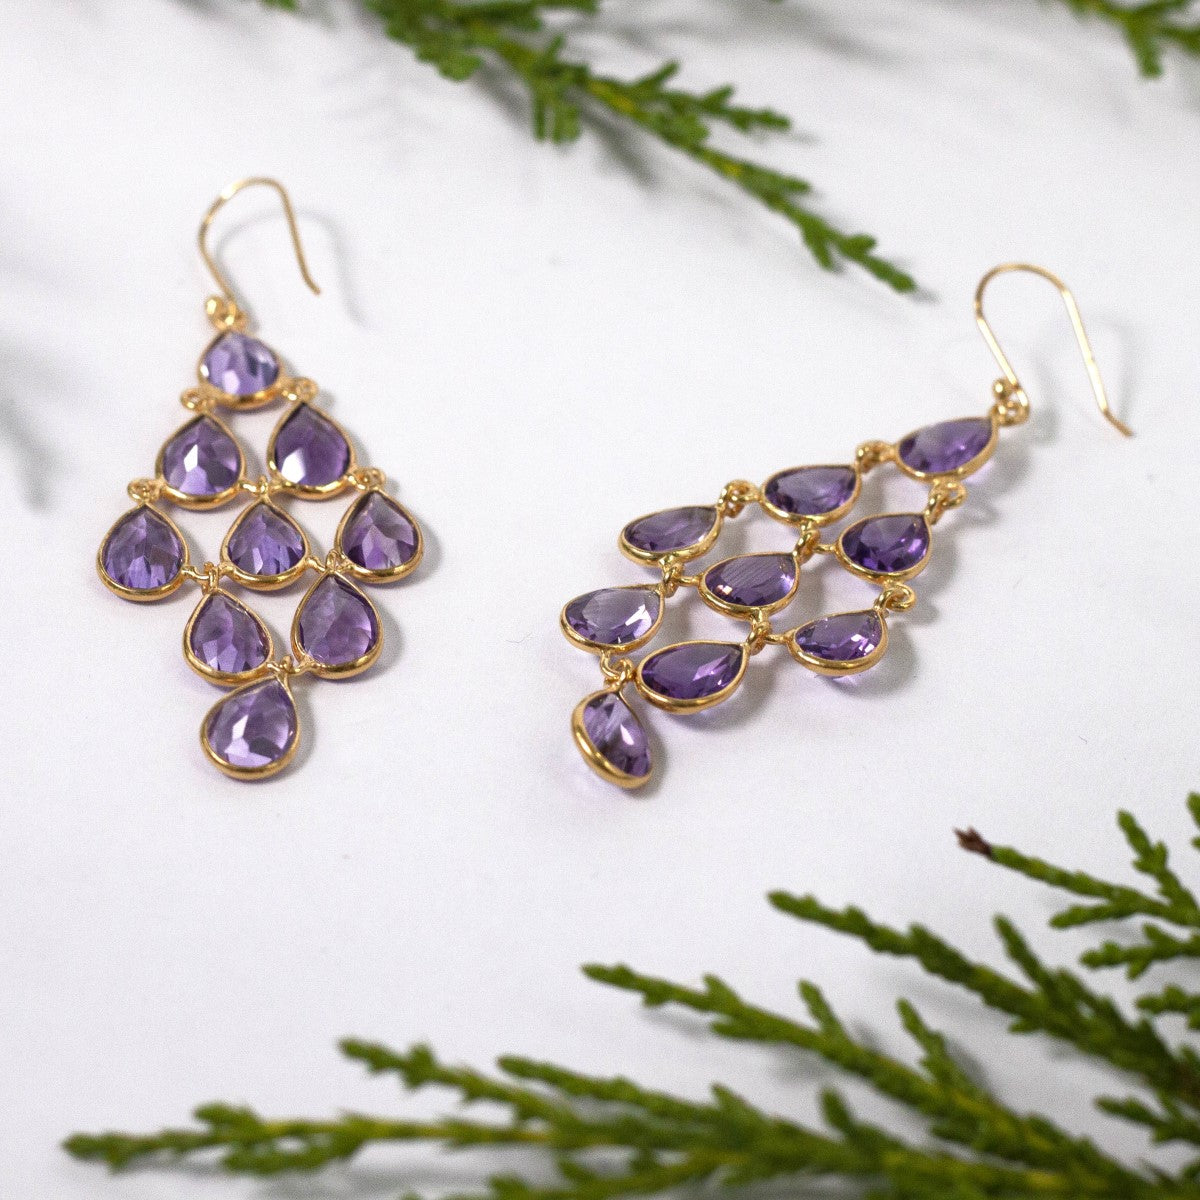 Gold Plated Sterling Silver Chandelier Earrings with Natural Gemstones  - Amethyst